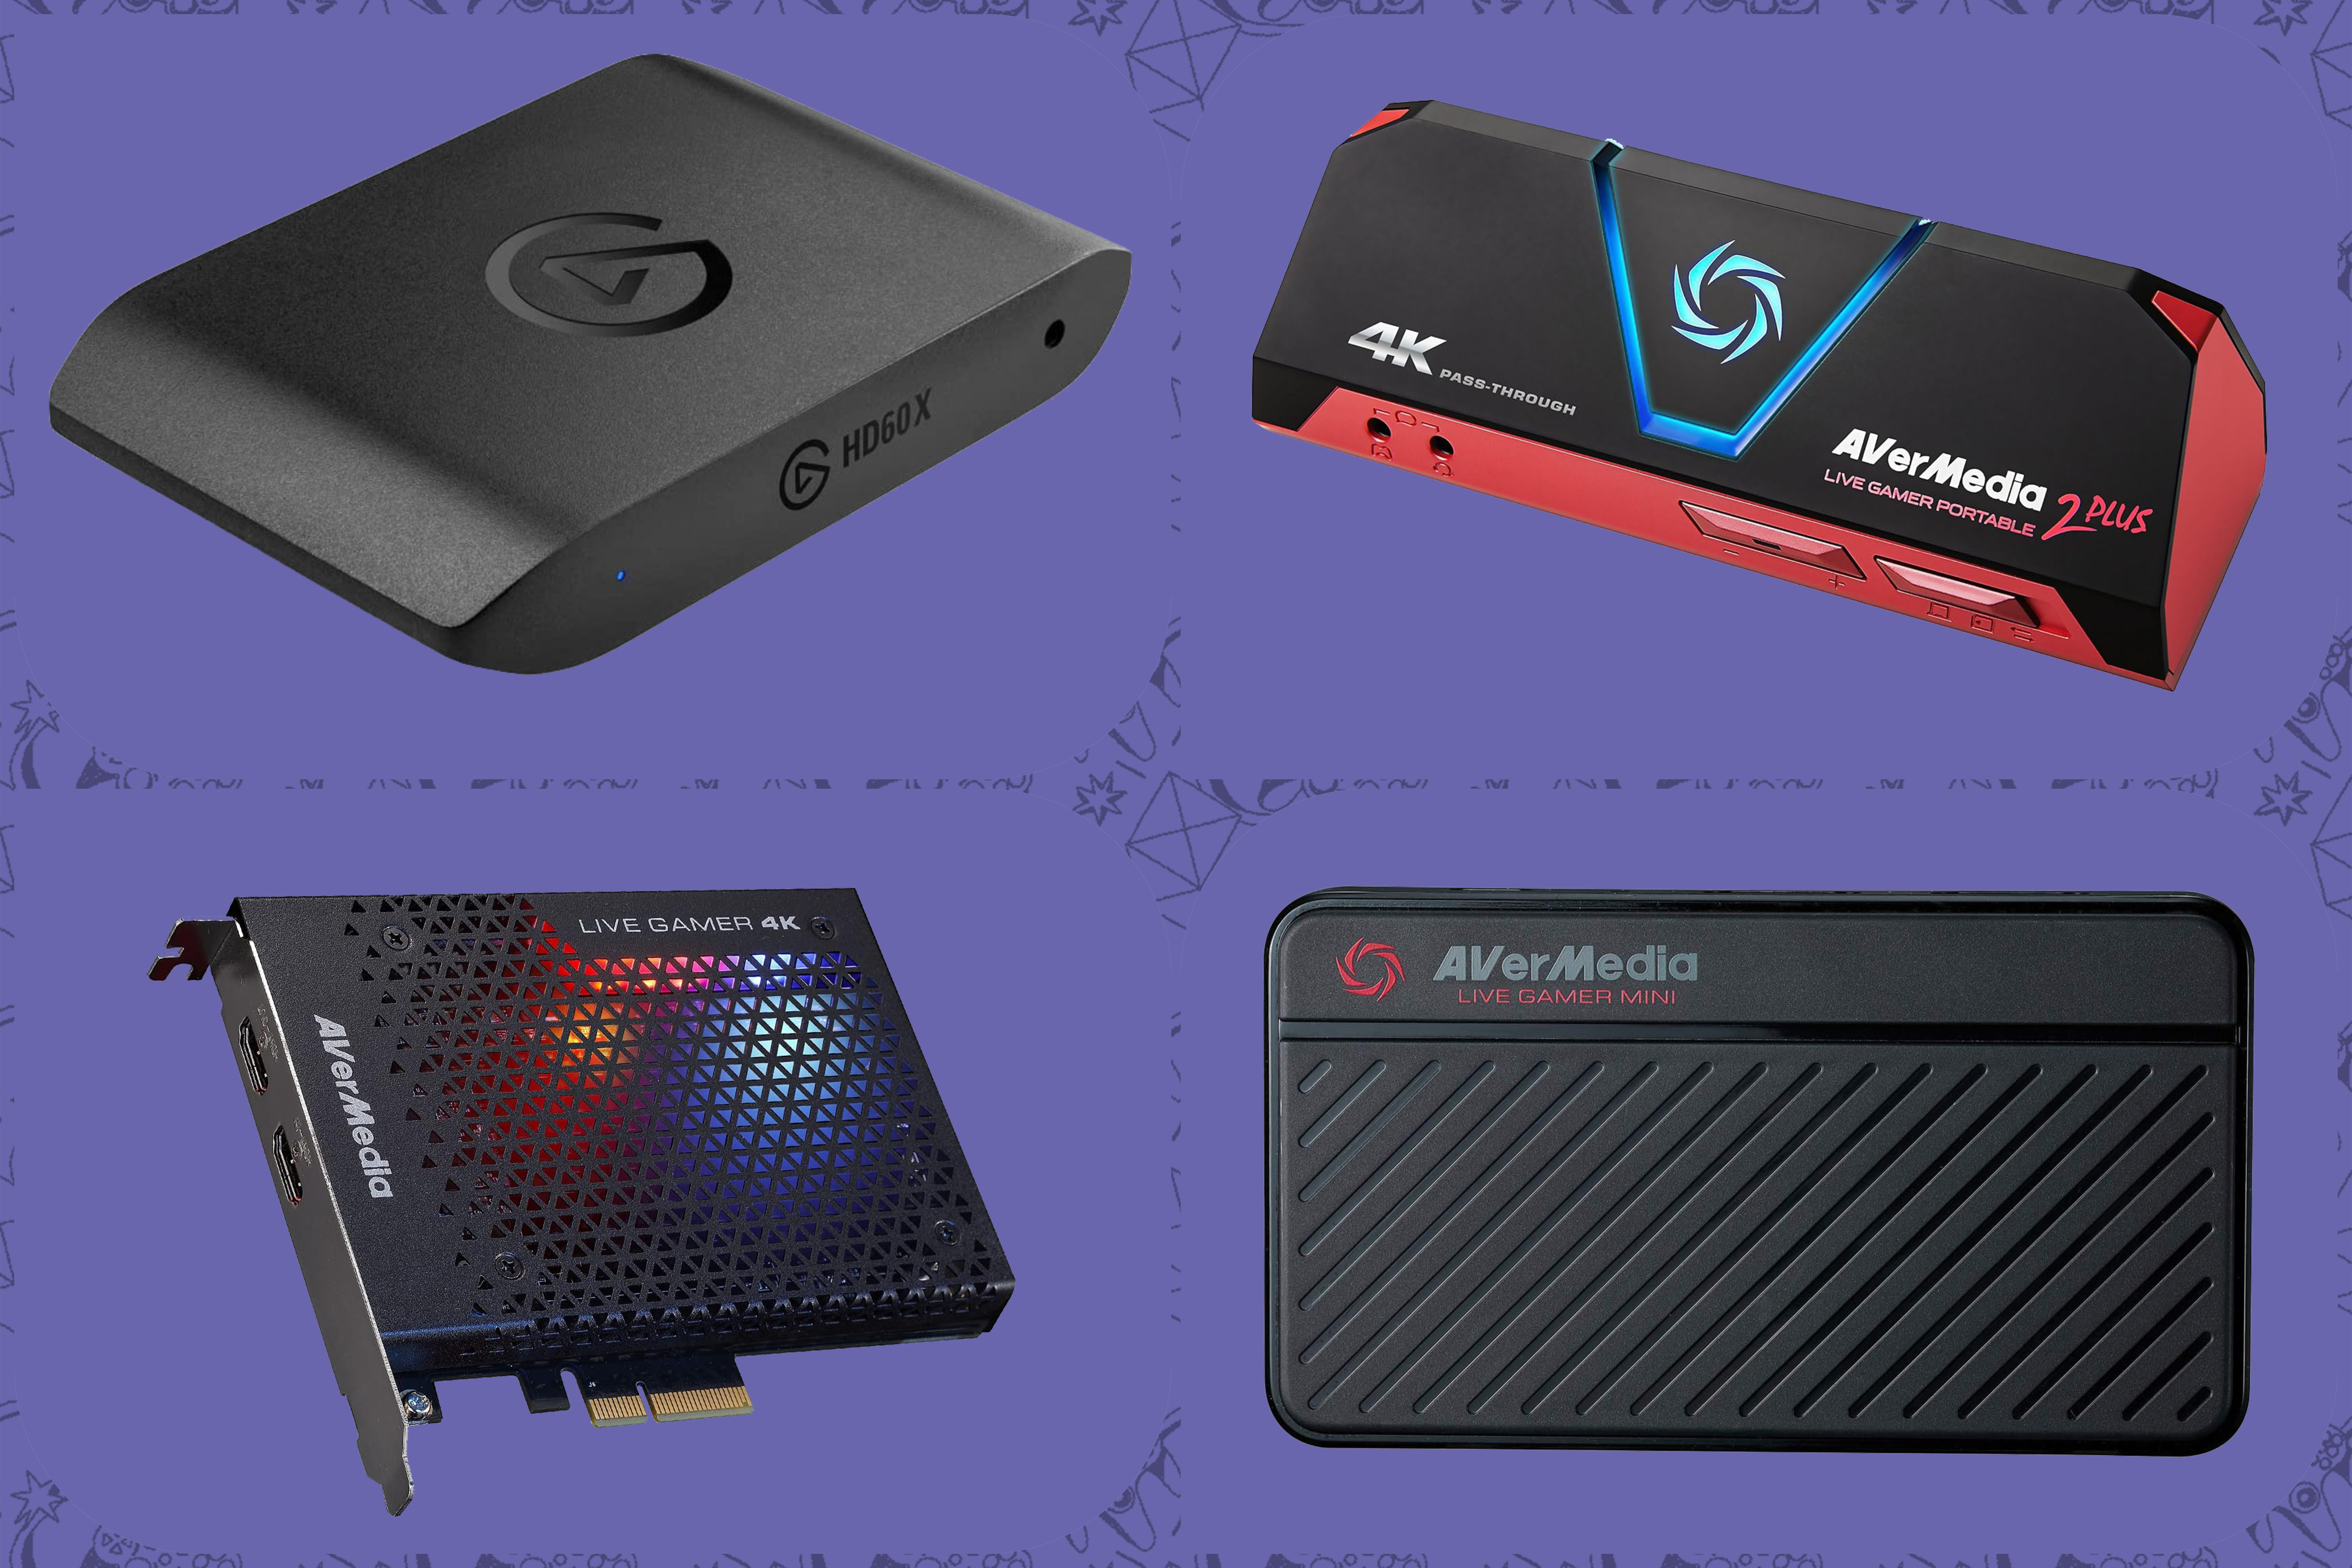 An image showing some of our top picks for capture cards, including the Elgato HD 60 X, and two AverMedia capture cards.